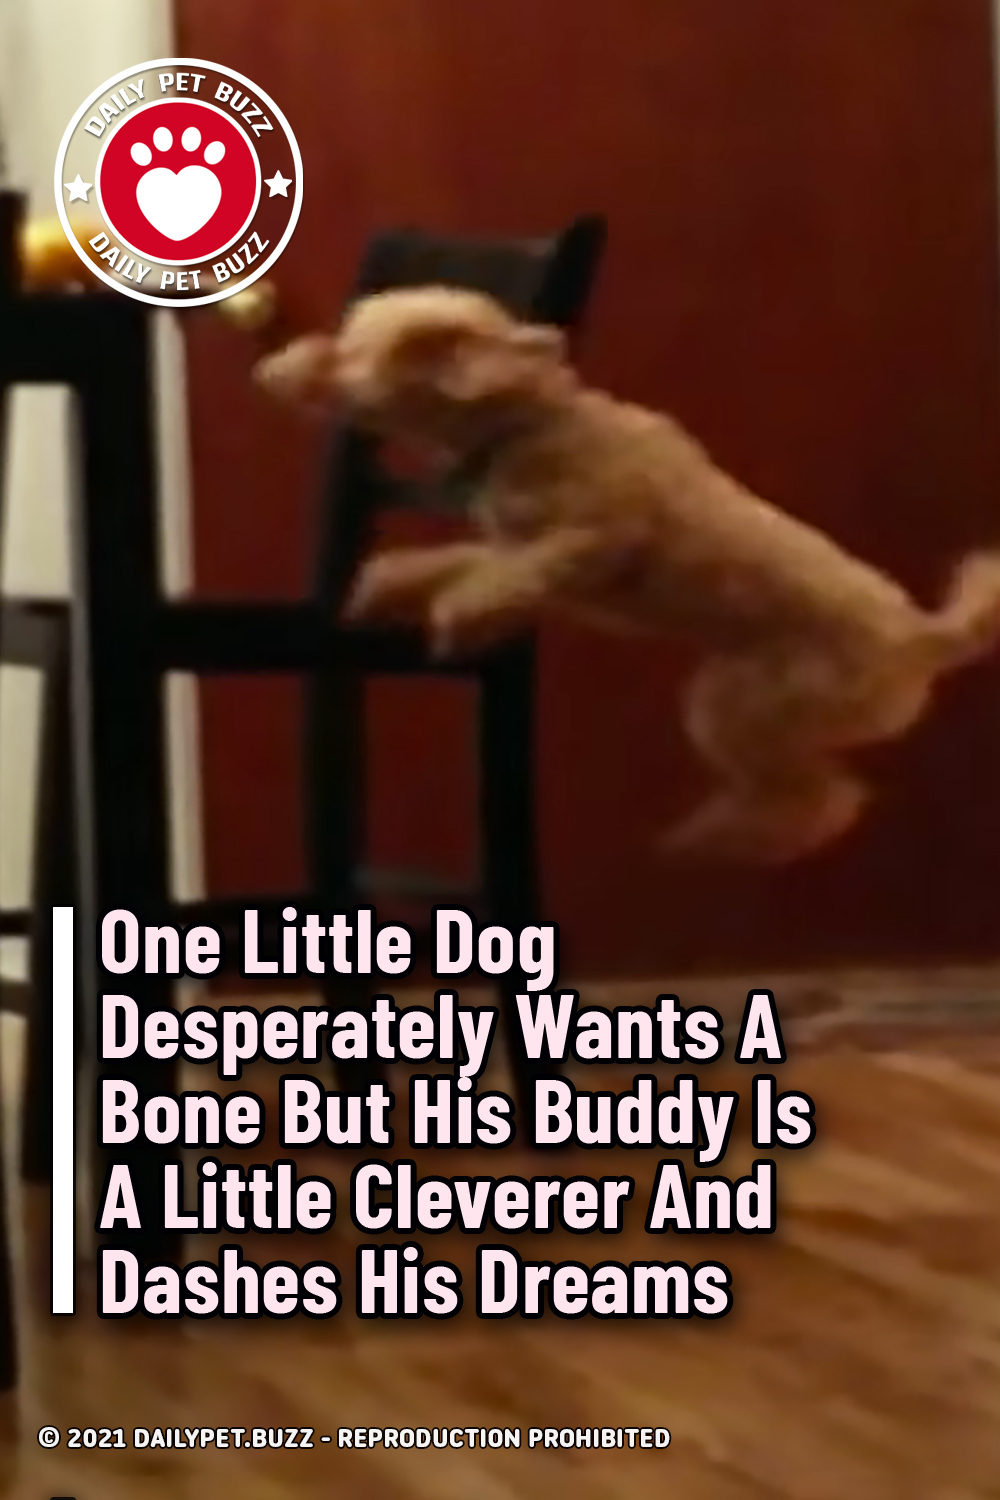 One Little Dog Desperately Wants A Bone But His Buddy Is A Little Cleverer And Dashes His Dreams